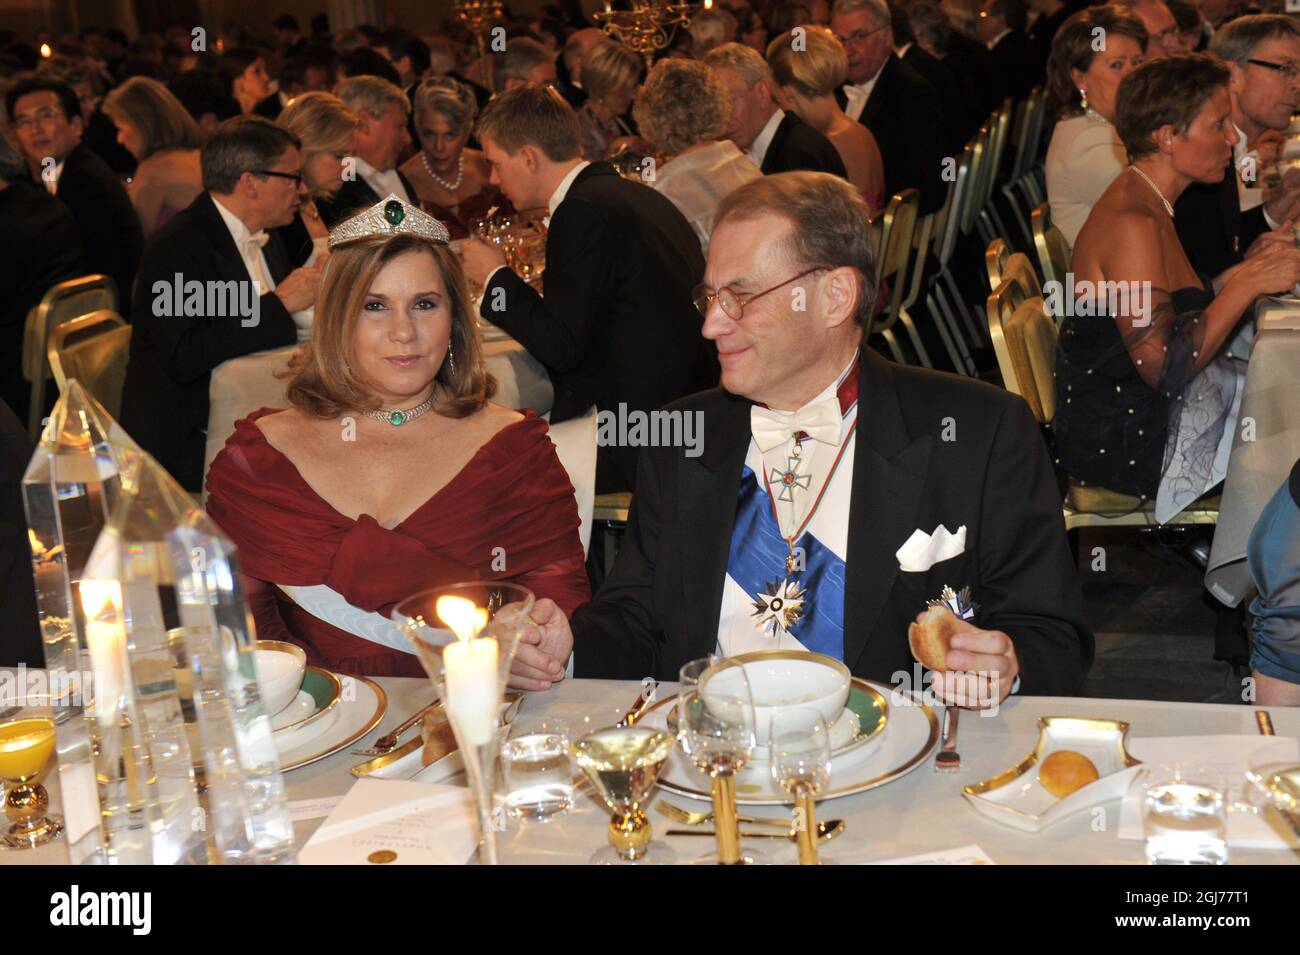 STOCKHOLM 20111210 The Grand Duchess Maria Teresa of Luxembourg and Per Westerberg, Speaker of the House of Parliament at the Nobel Banquet in the City Hall in Stockholm Sweden, December 10, 2011. Foto: Jonas Ekstromer / SCANPIX Kod: 10030 Stock Photo